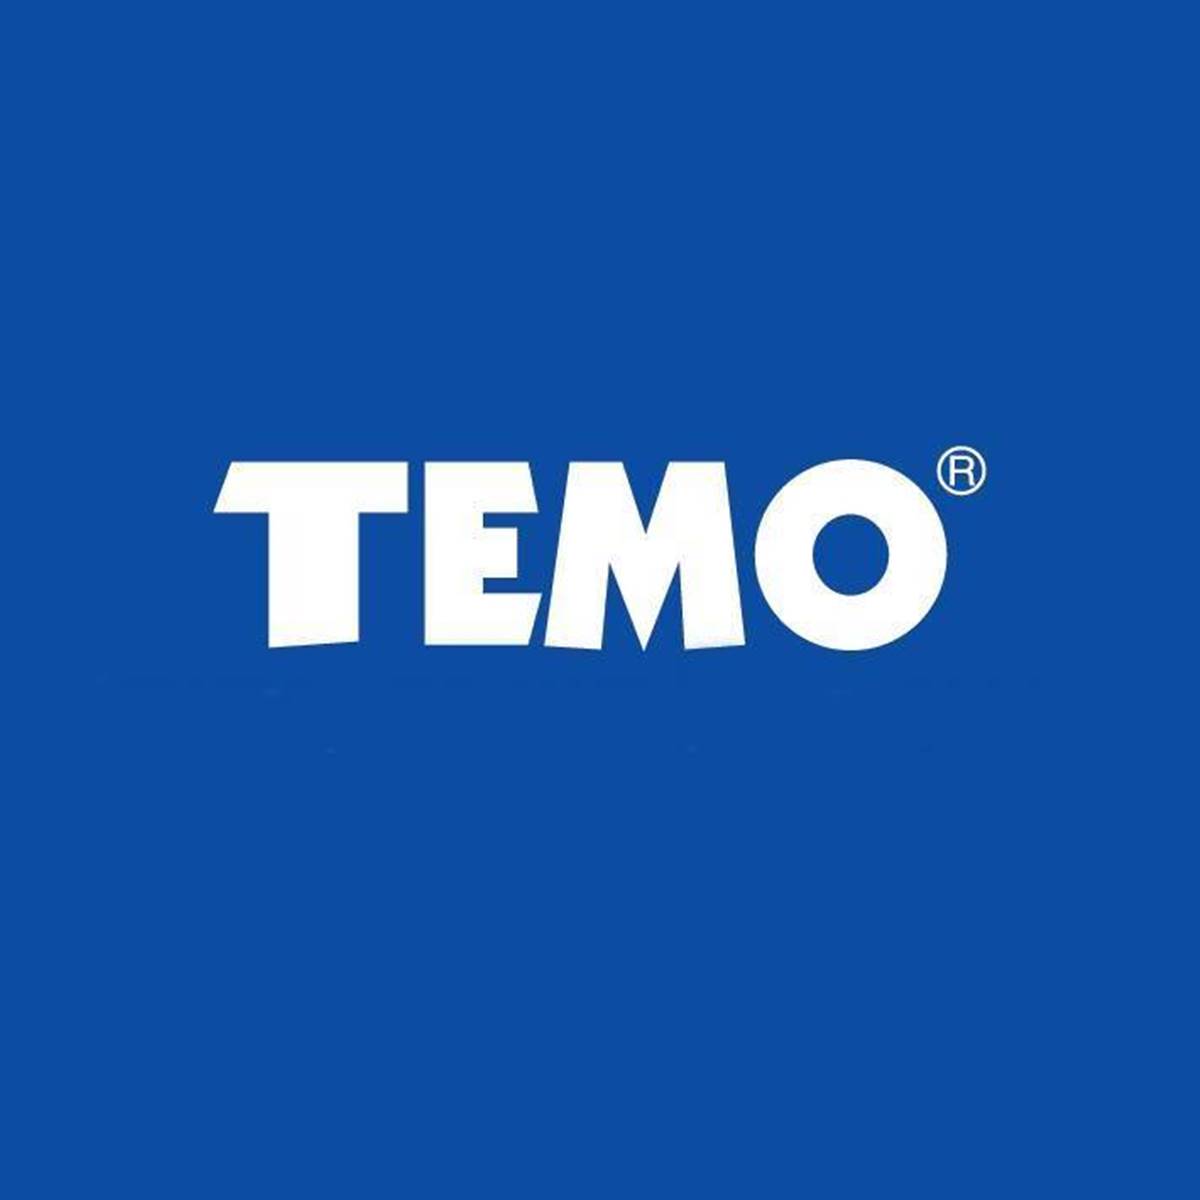 Contact Temo Group